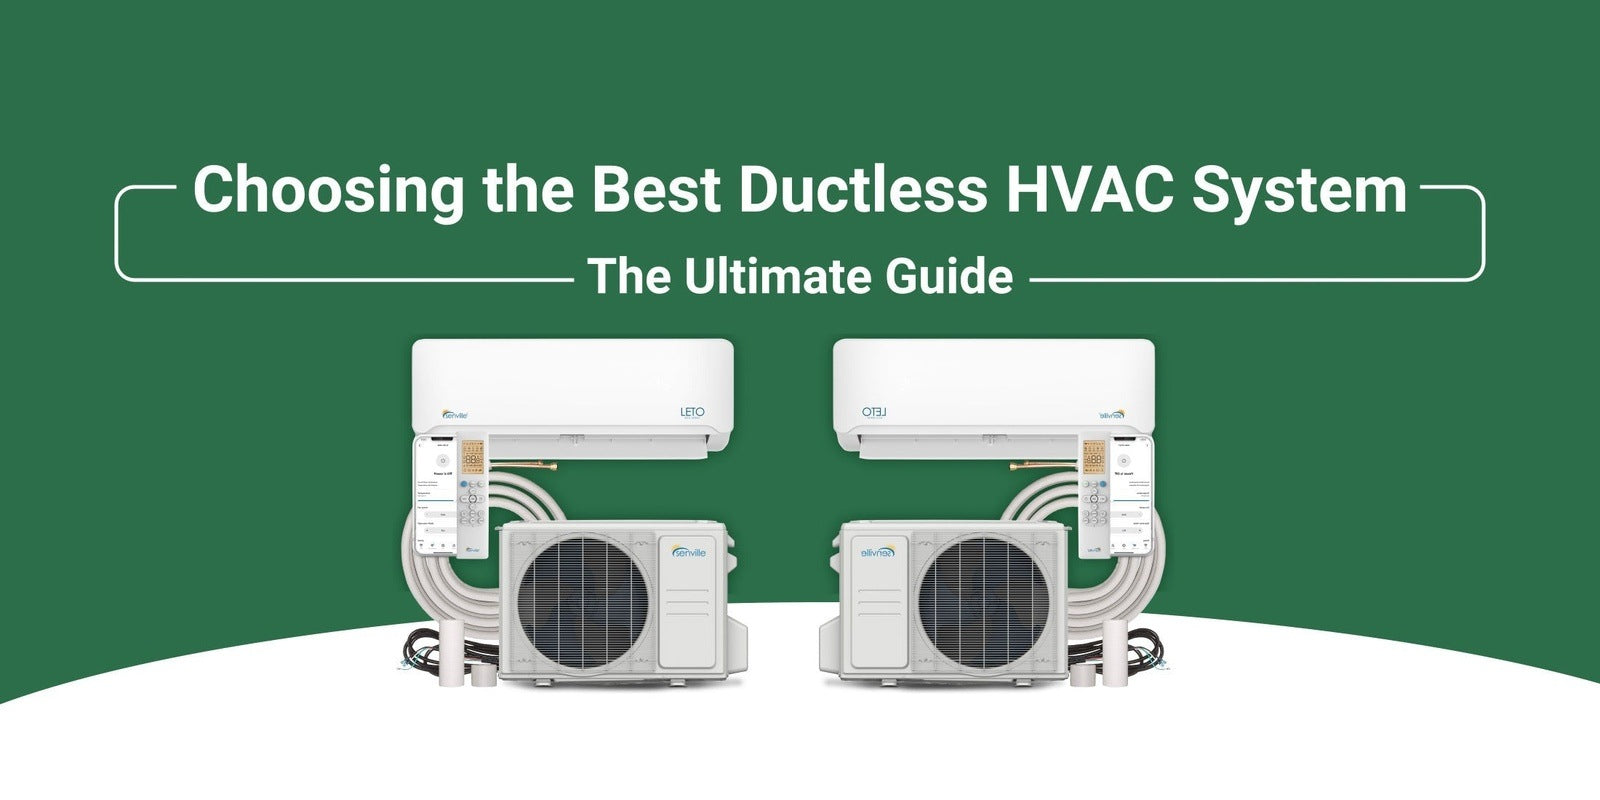 The Ultimate Guide to Mini-Split HVAC Systems